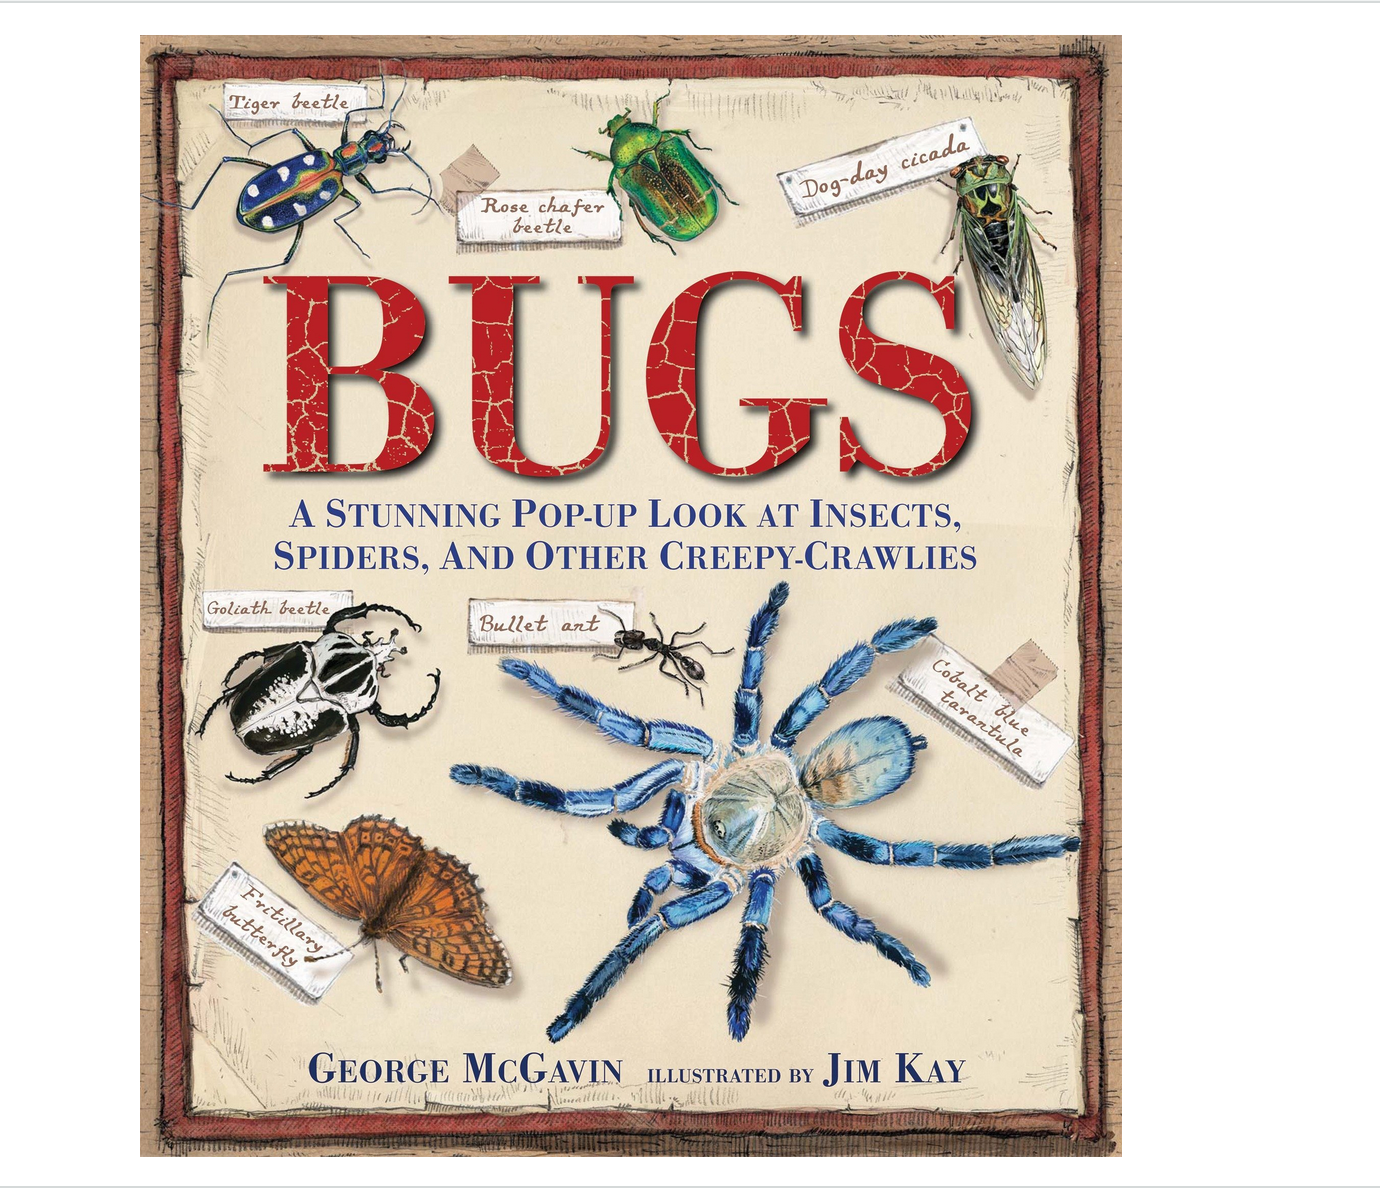 BUGS: A STUNNING POP UP LOOK AT INSECTS, SPIDERS, AND OTHER CREEPY- CRAWLIES